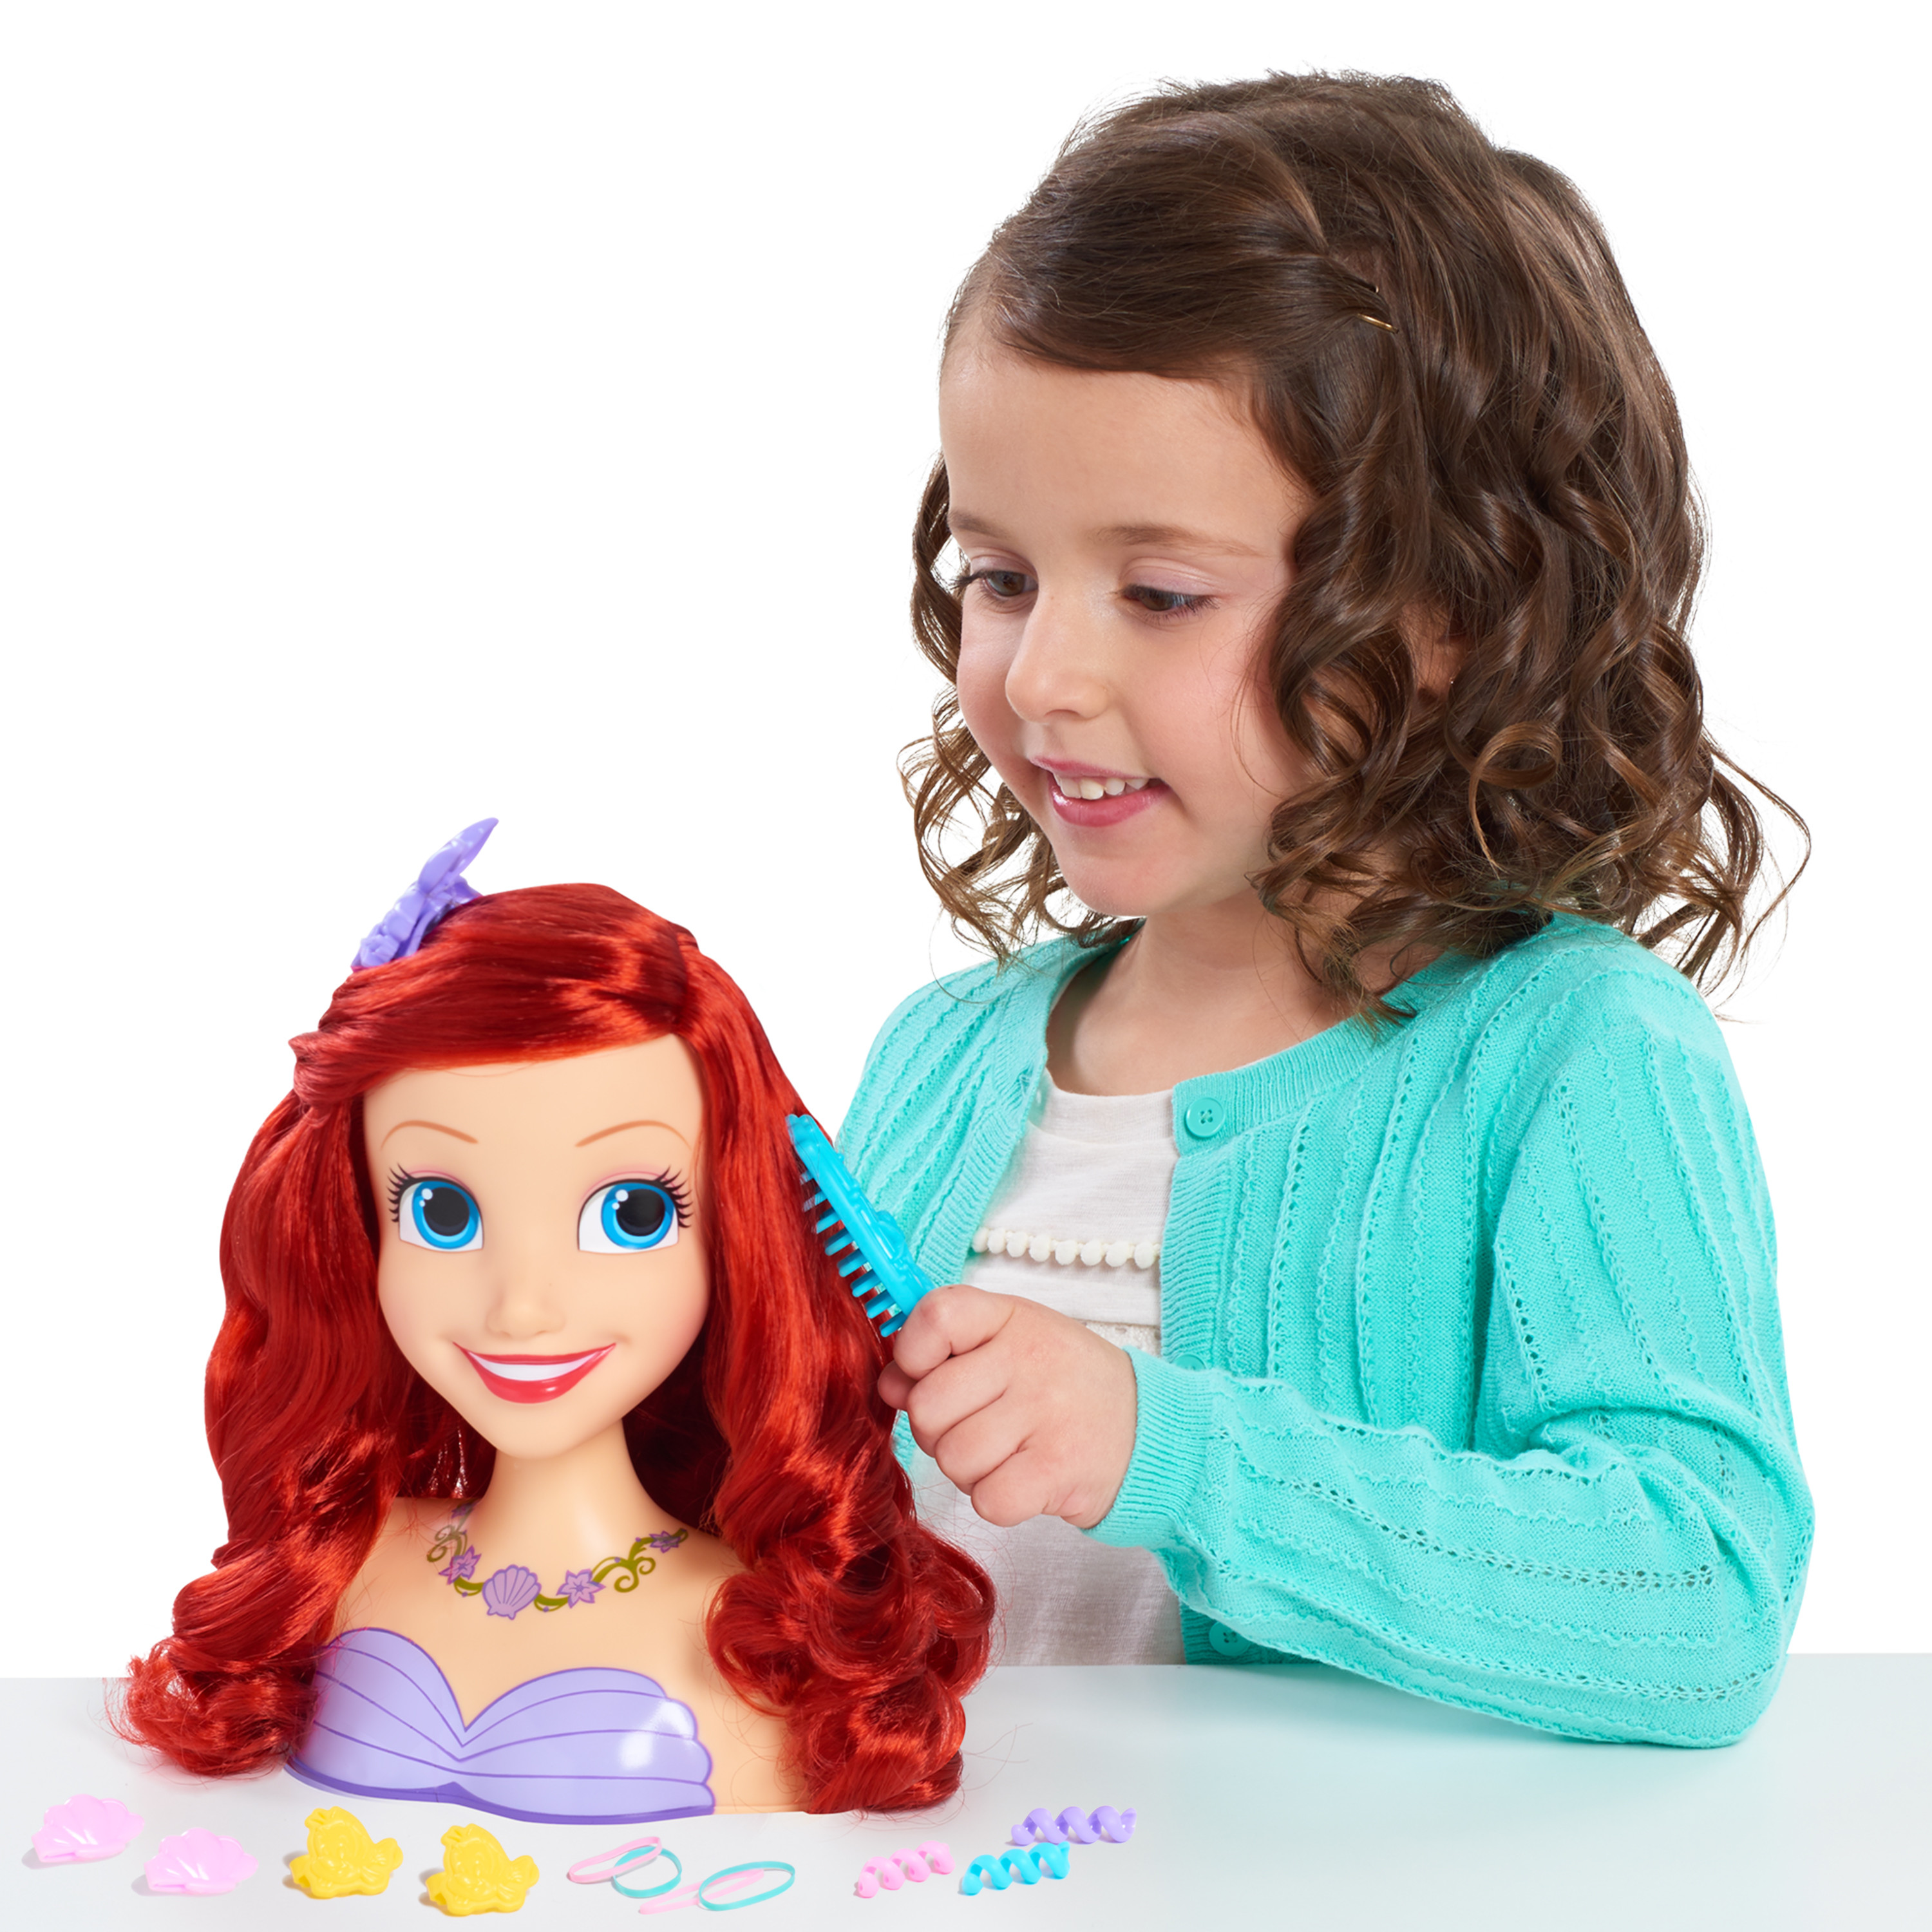 Disney Princess Ariel Styling Head, 14-pieces, Officially Licensed Kids Toys for Ages 3 Up, Gifts and Presents - image 2 of 3